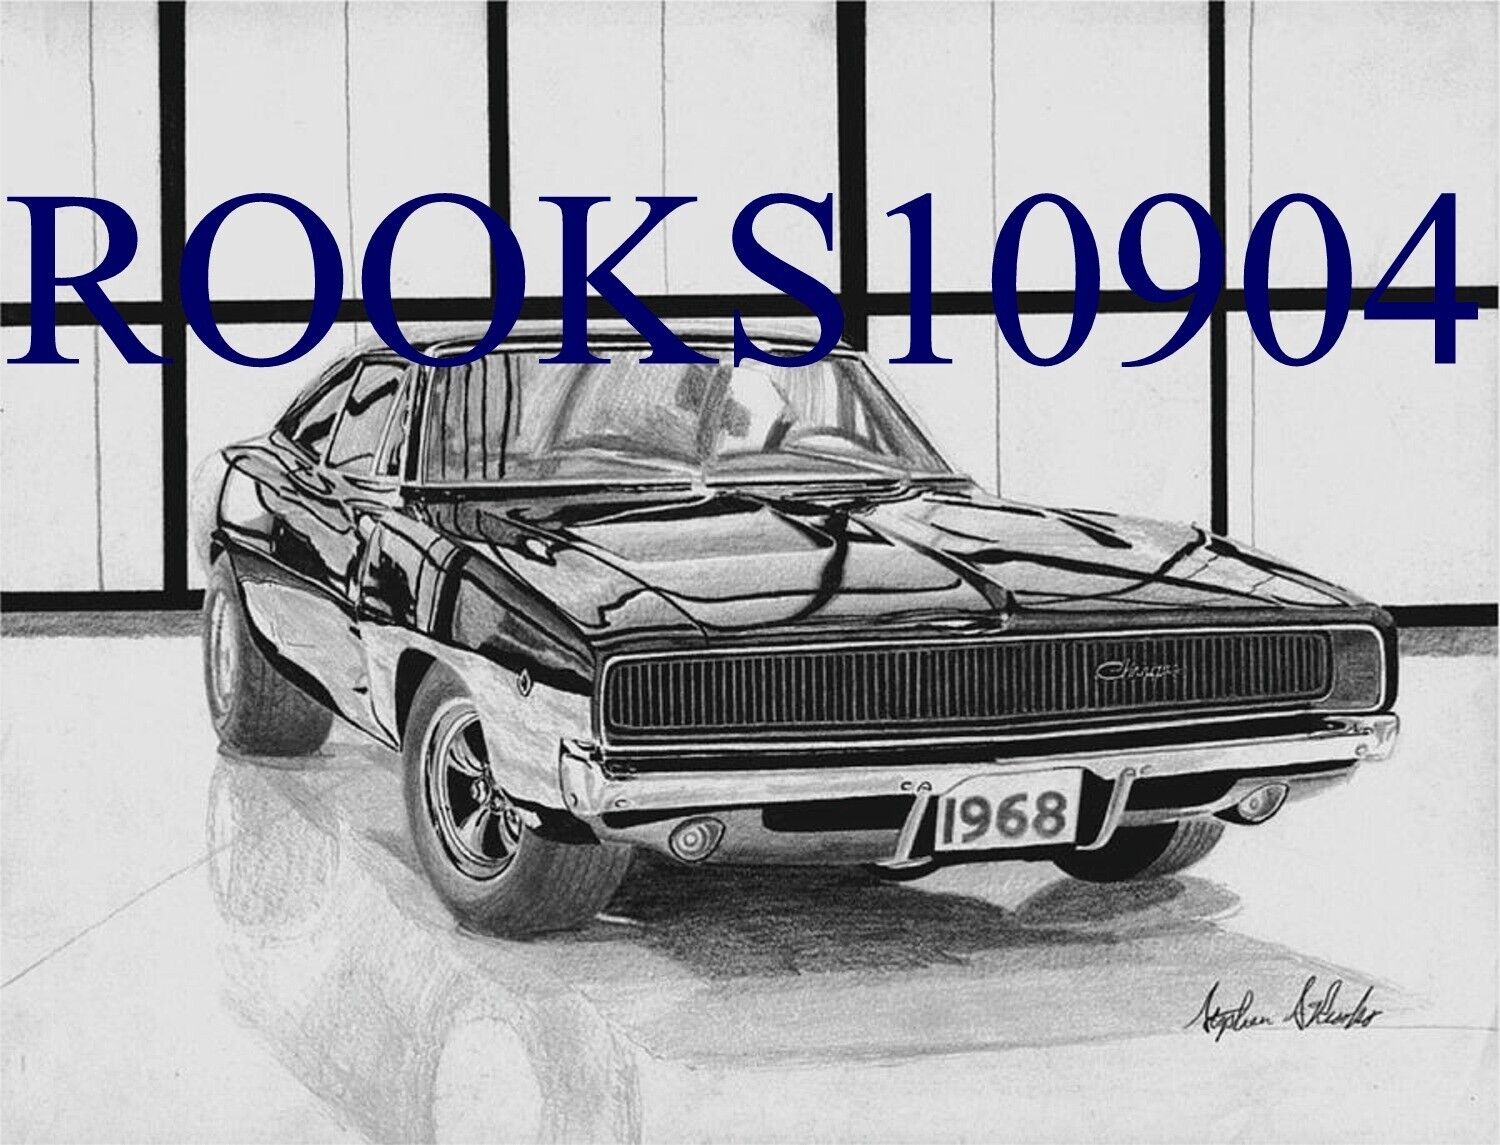 1968 Dodge Charger MUSCLE CAR ART PRINT